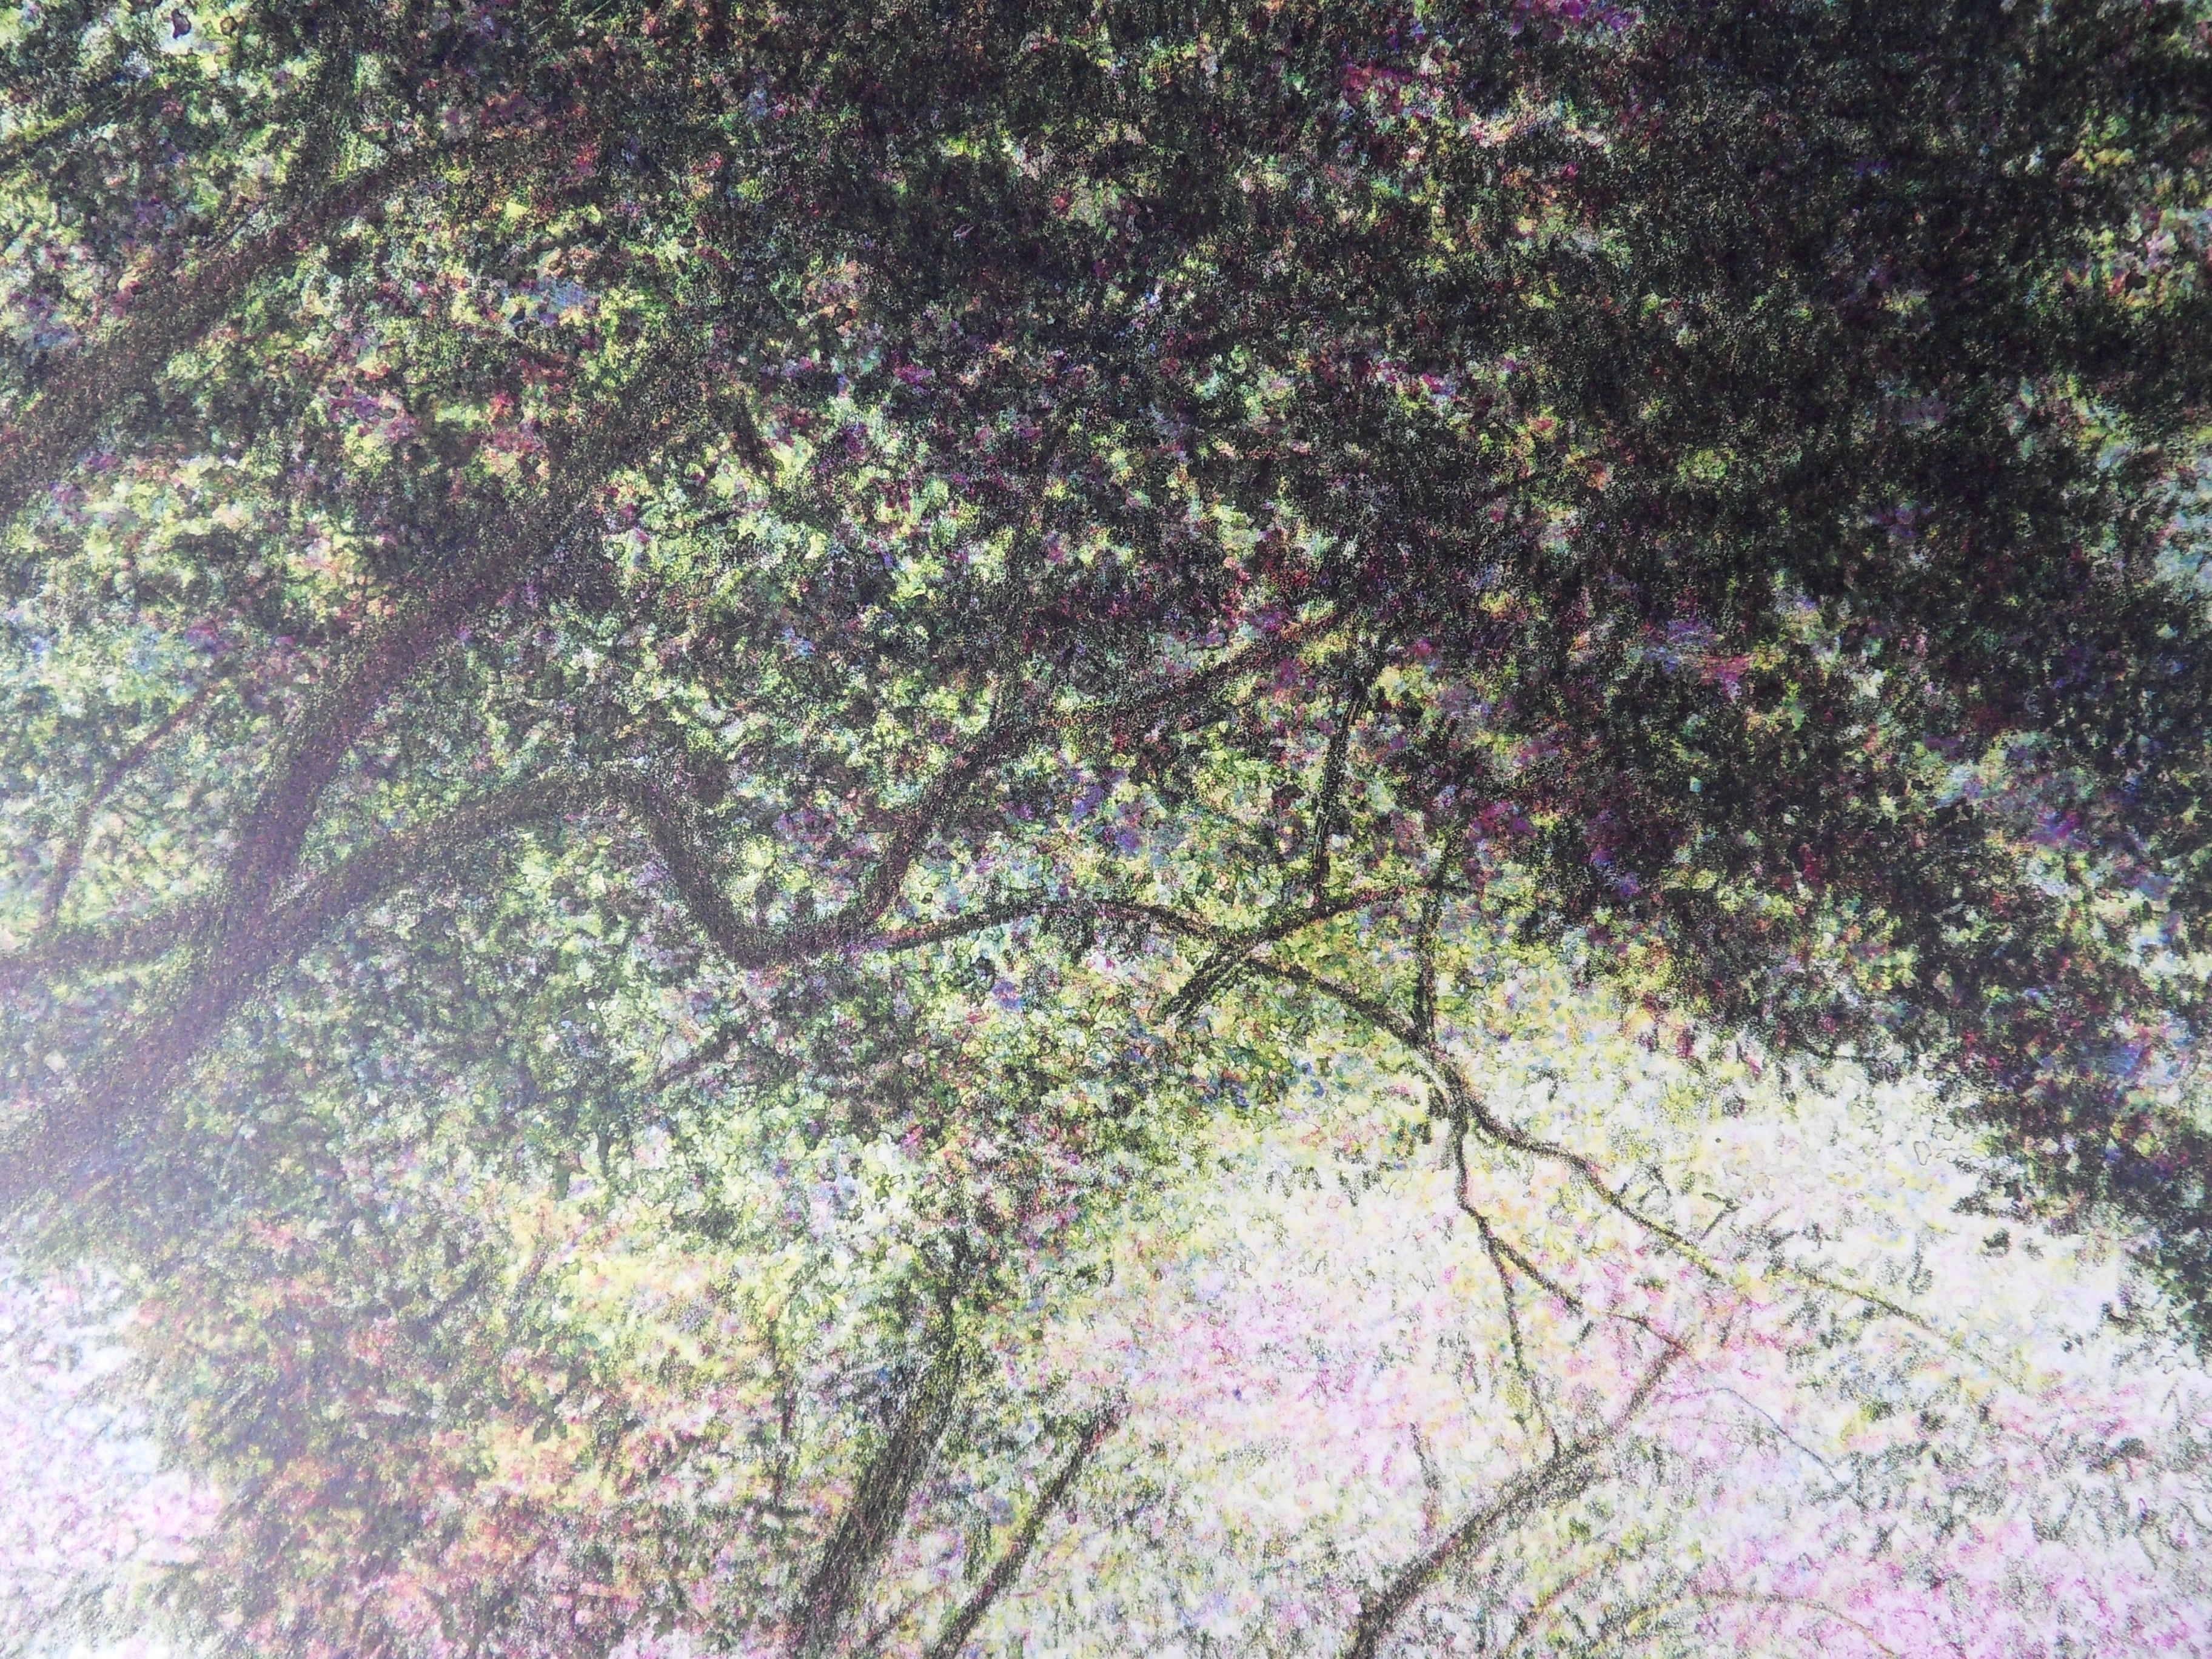 Harold ALTMAN
New York City : Spring at Central Park

Original lithograph
Handsigned in pencil
Justified Artist Proof
On Arches vellum 76 x 56 cm (c. 30 x 22 in)

INFORMATION : Bears the blind stamp of the printer 